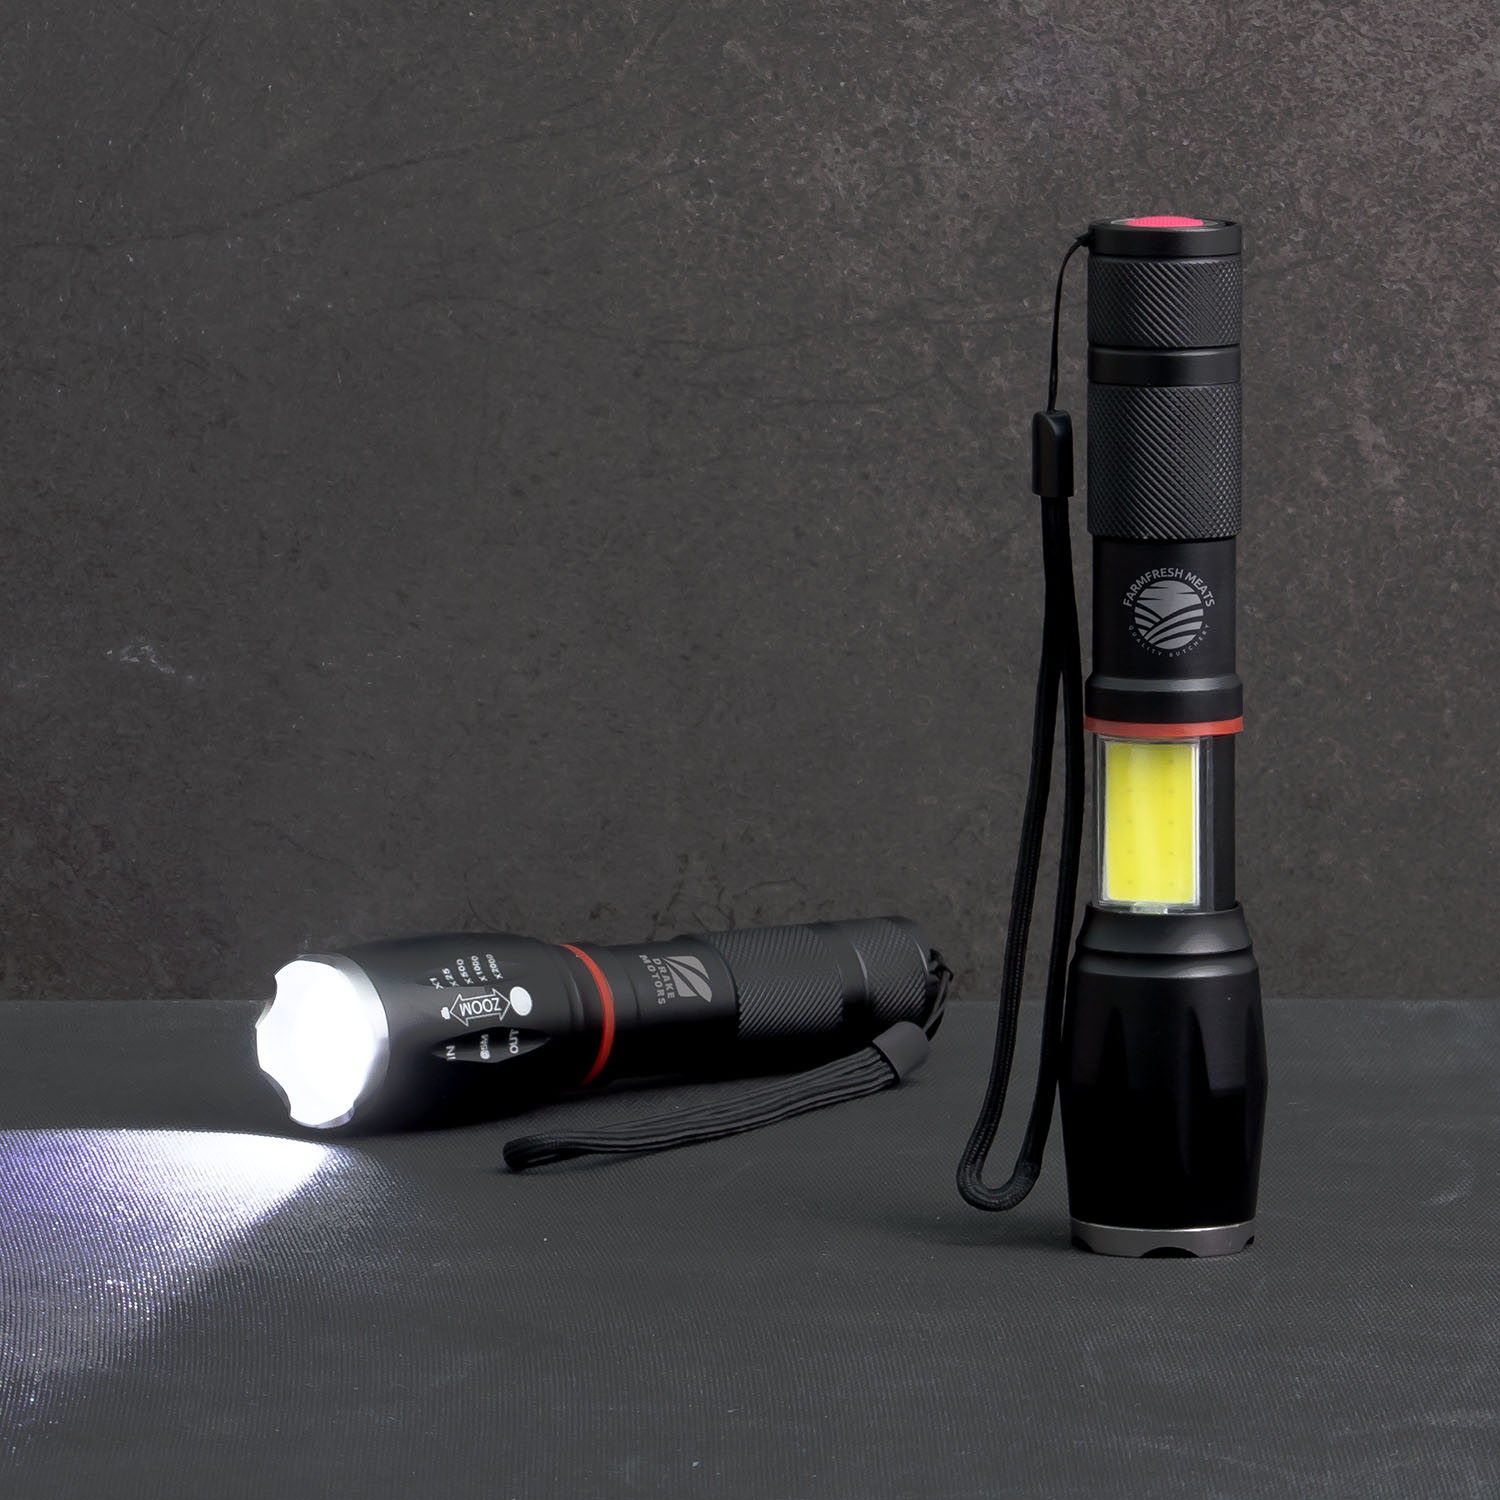 2 In 1 Torch & Work Light Features